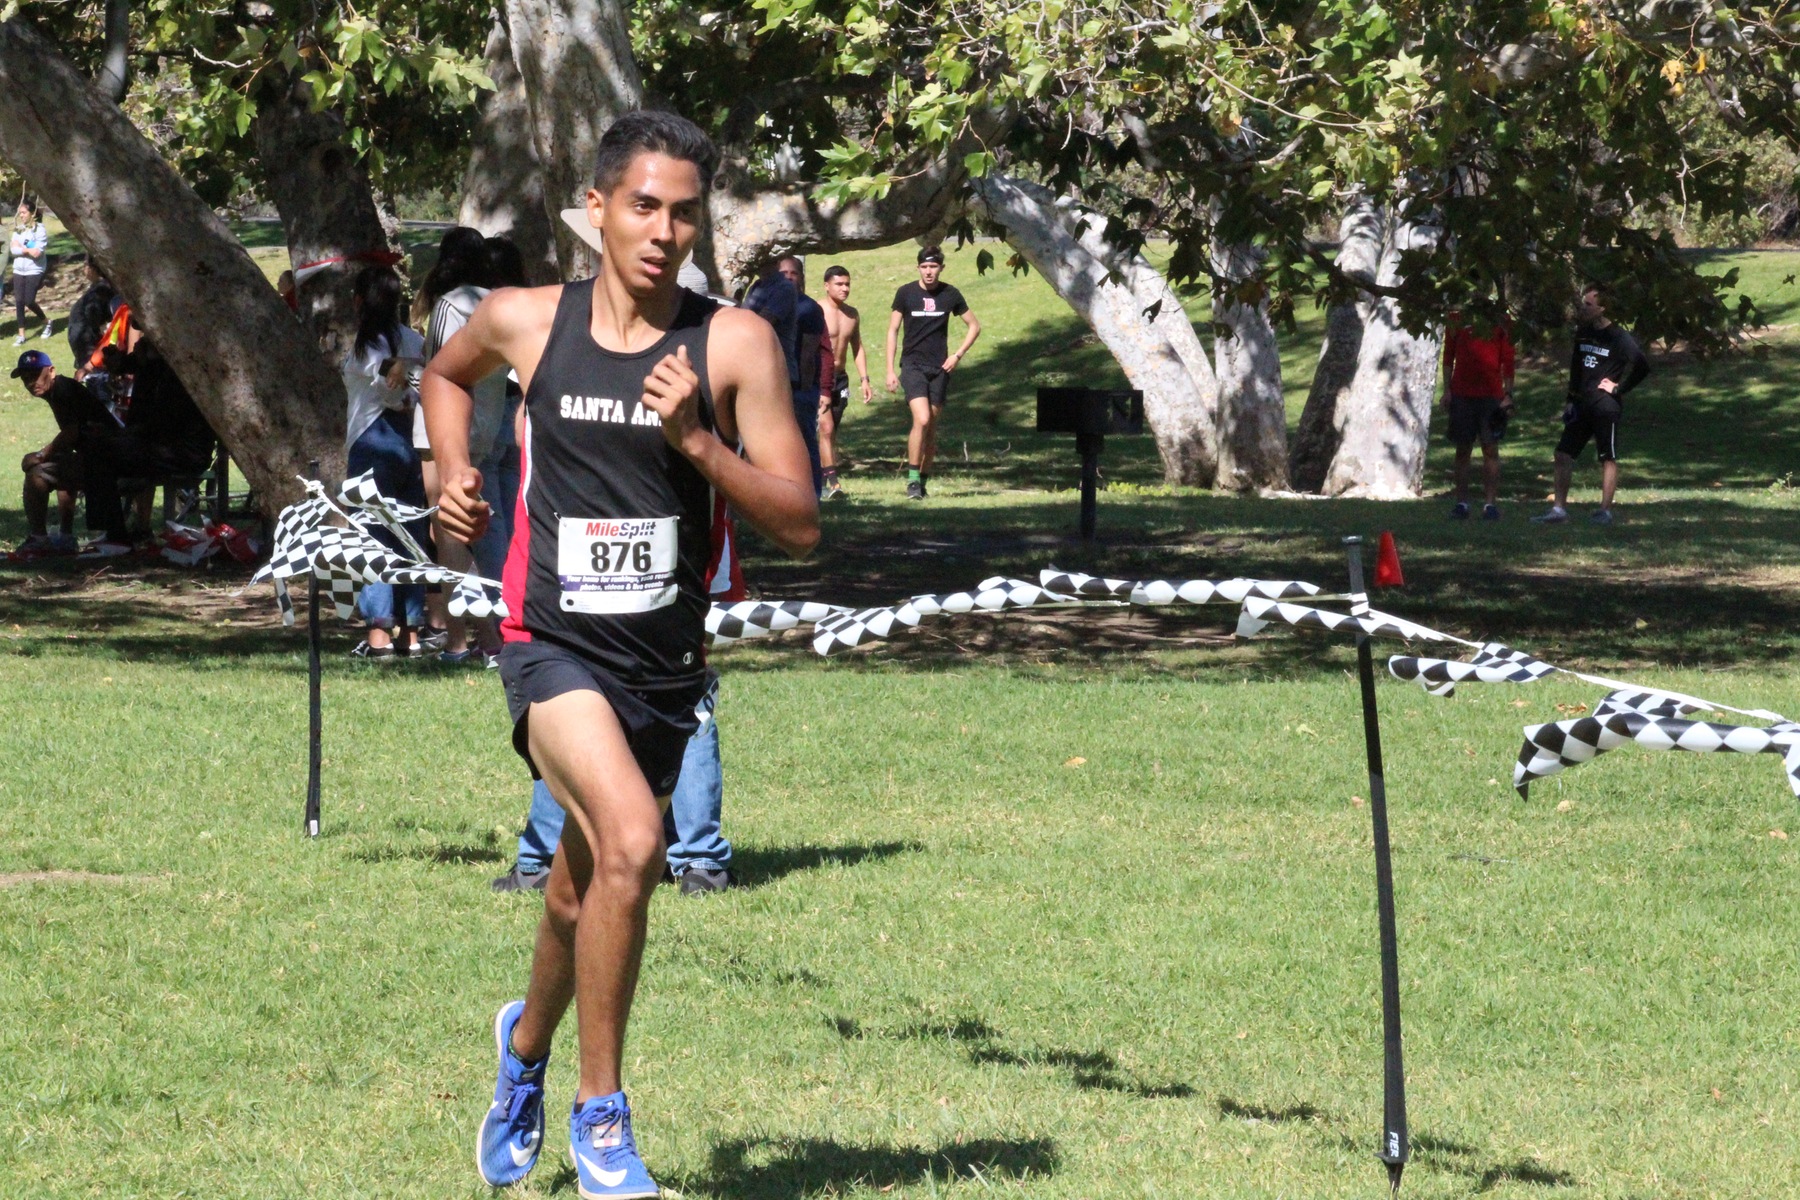 Barajas Pulls Away to Win SAC Hosted Brubaker Invitational